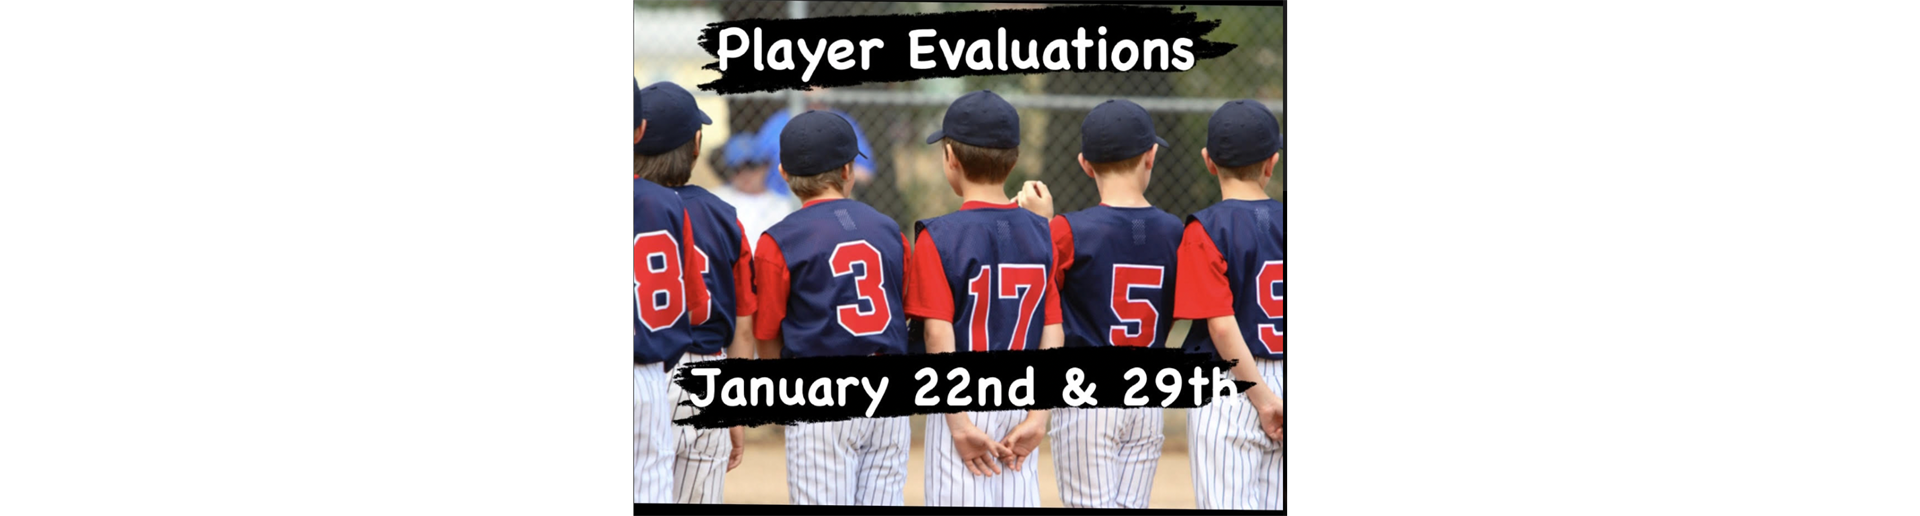 FINAL WEEKEND PLAYER EVALUATIONS SUNDAY 1.29